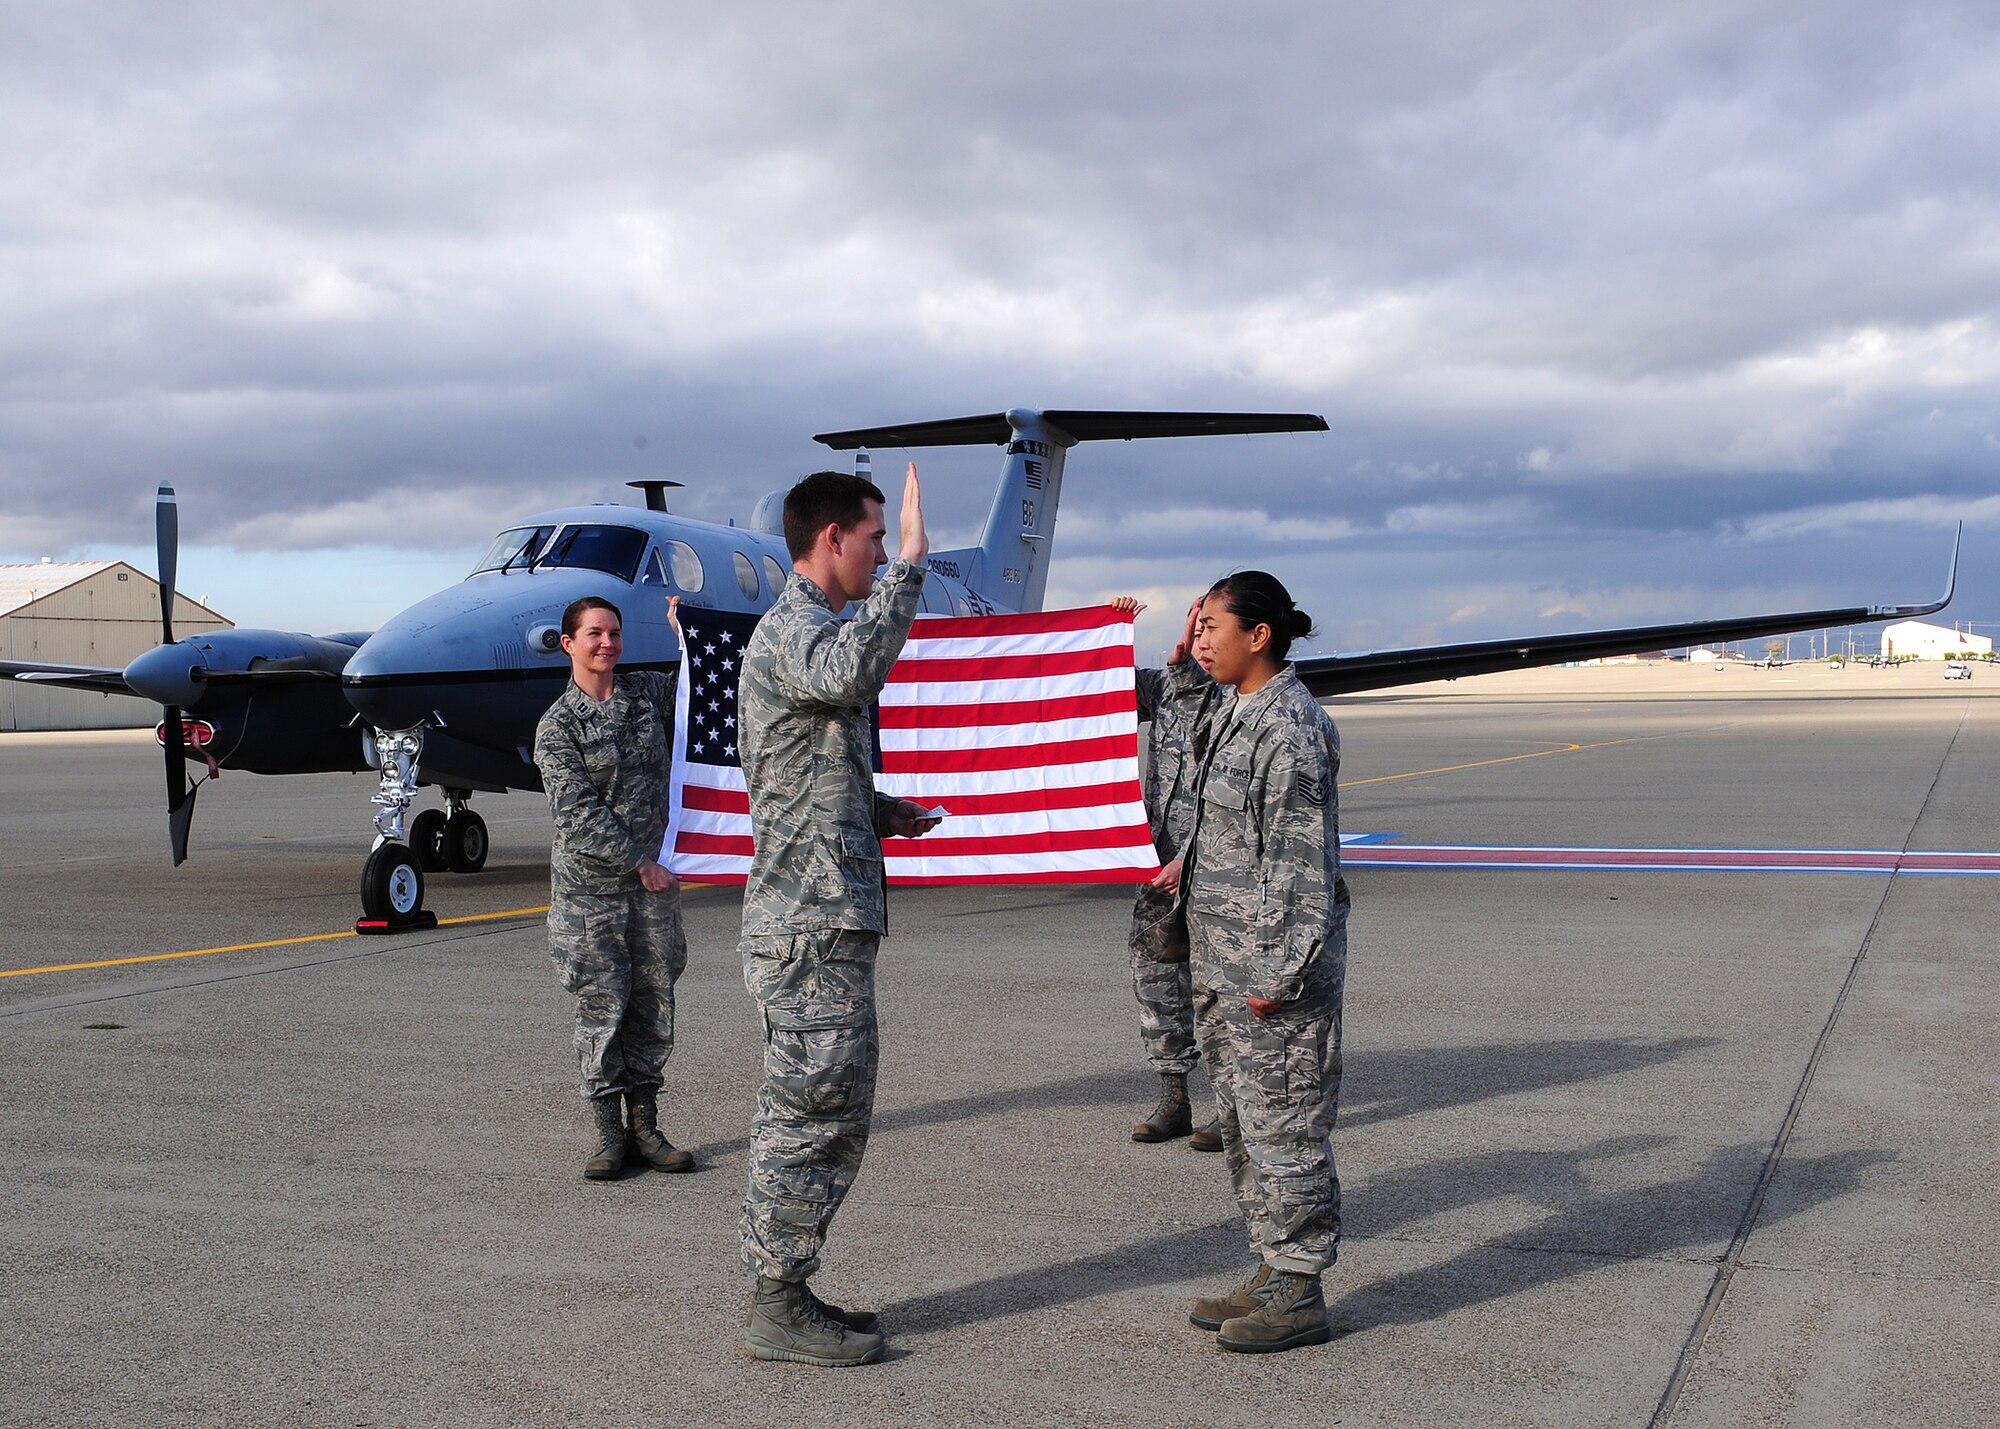 Tech. Sgt. Michelle Aquino (right) re-enlists on the 12th month on the 12 day of 2012 at 12:12 p.m. in front of an Air Force MC-12W Liberty intelligence, surveillance and reconnaissance aircraft at Beale Air Force Base, Calif. Aquino is a 9th Force Support Squadron personnelist who has served in the Air Force for 10 years. (U.S. Air Force photo by Senior Airman Shawn Nickel/Released)